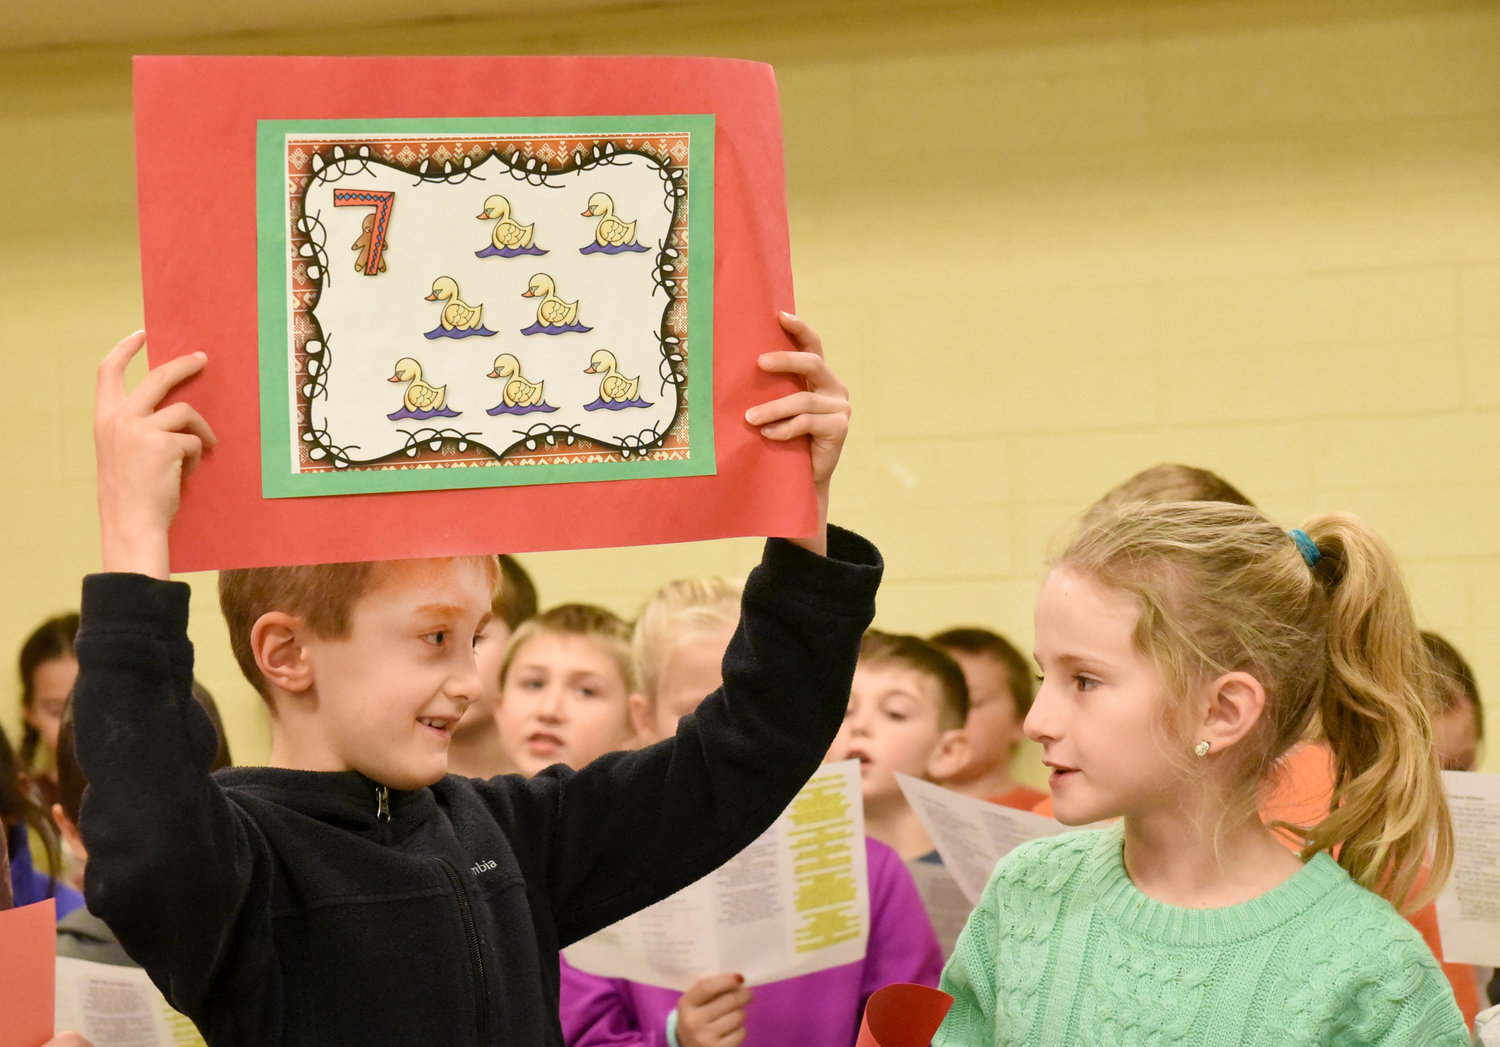 Liam Frederick holds up a poster for seven swans a swimming. He and Kinsley Ginerich were performing “The Twelve Days of Christmas.” The Mid-Prairie East second graders performed Christmas songs for the Rotary Club of Kalona on Dec. 17.